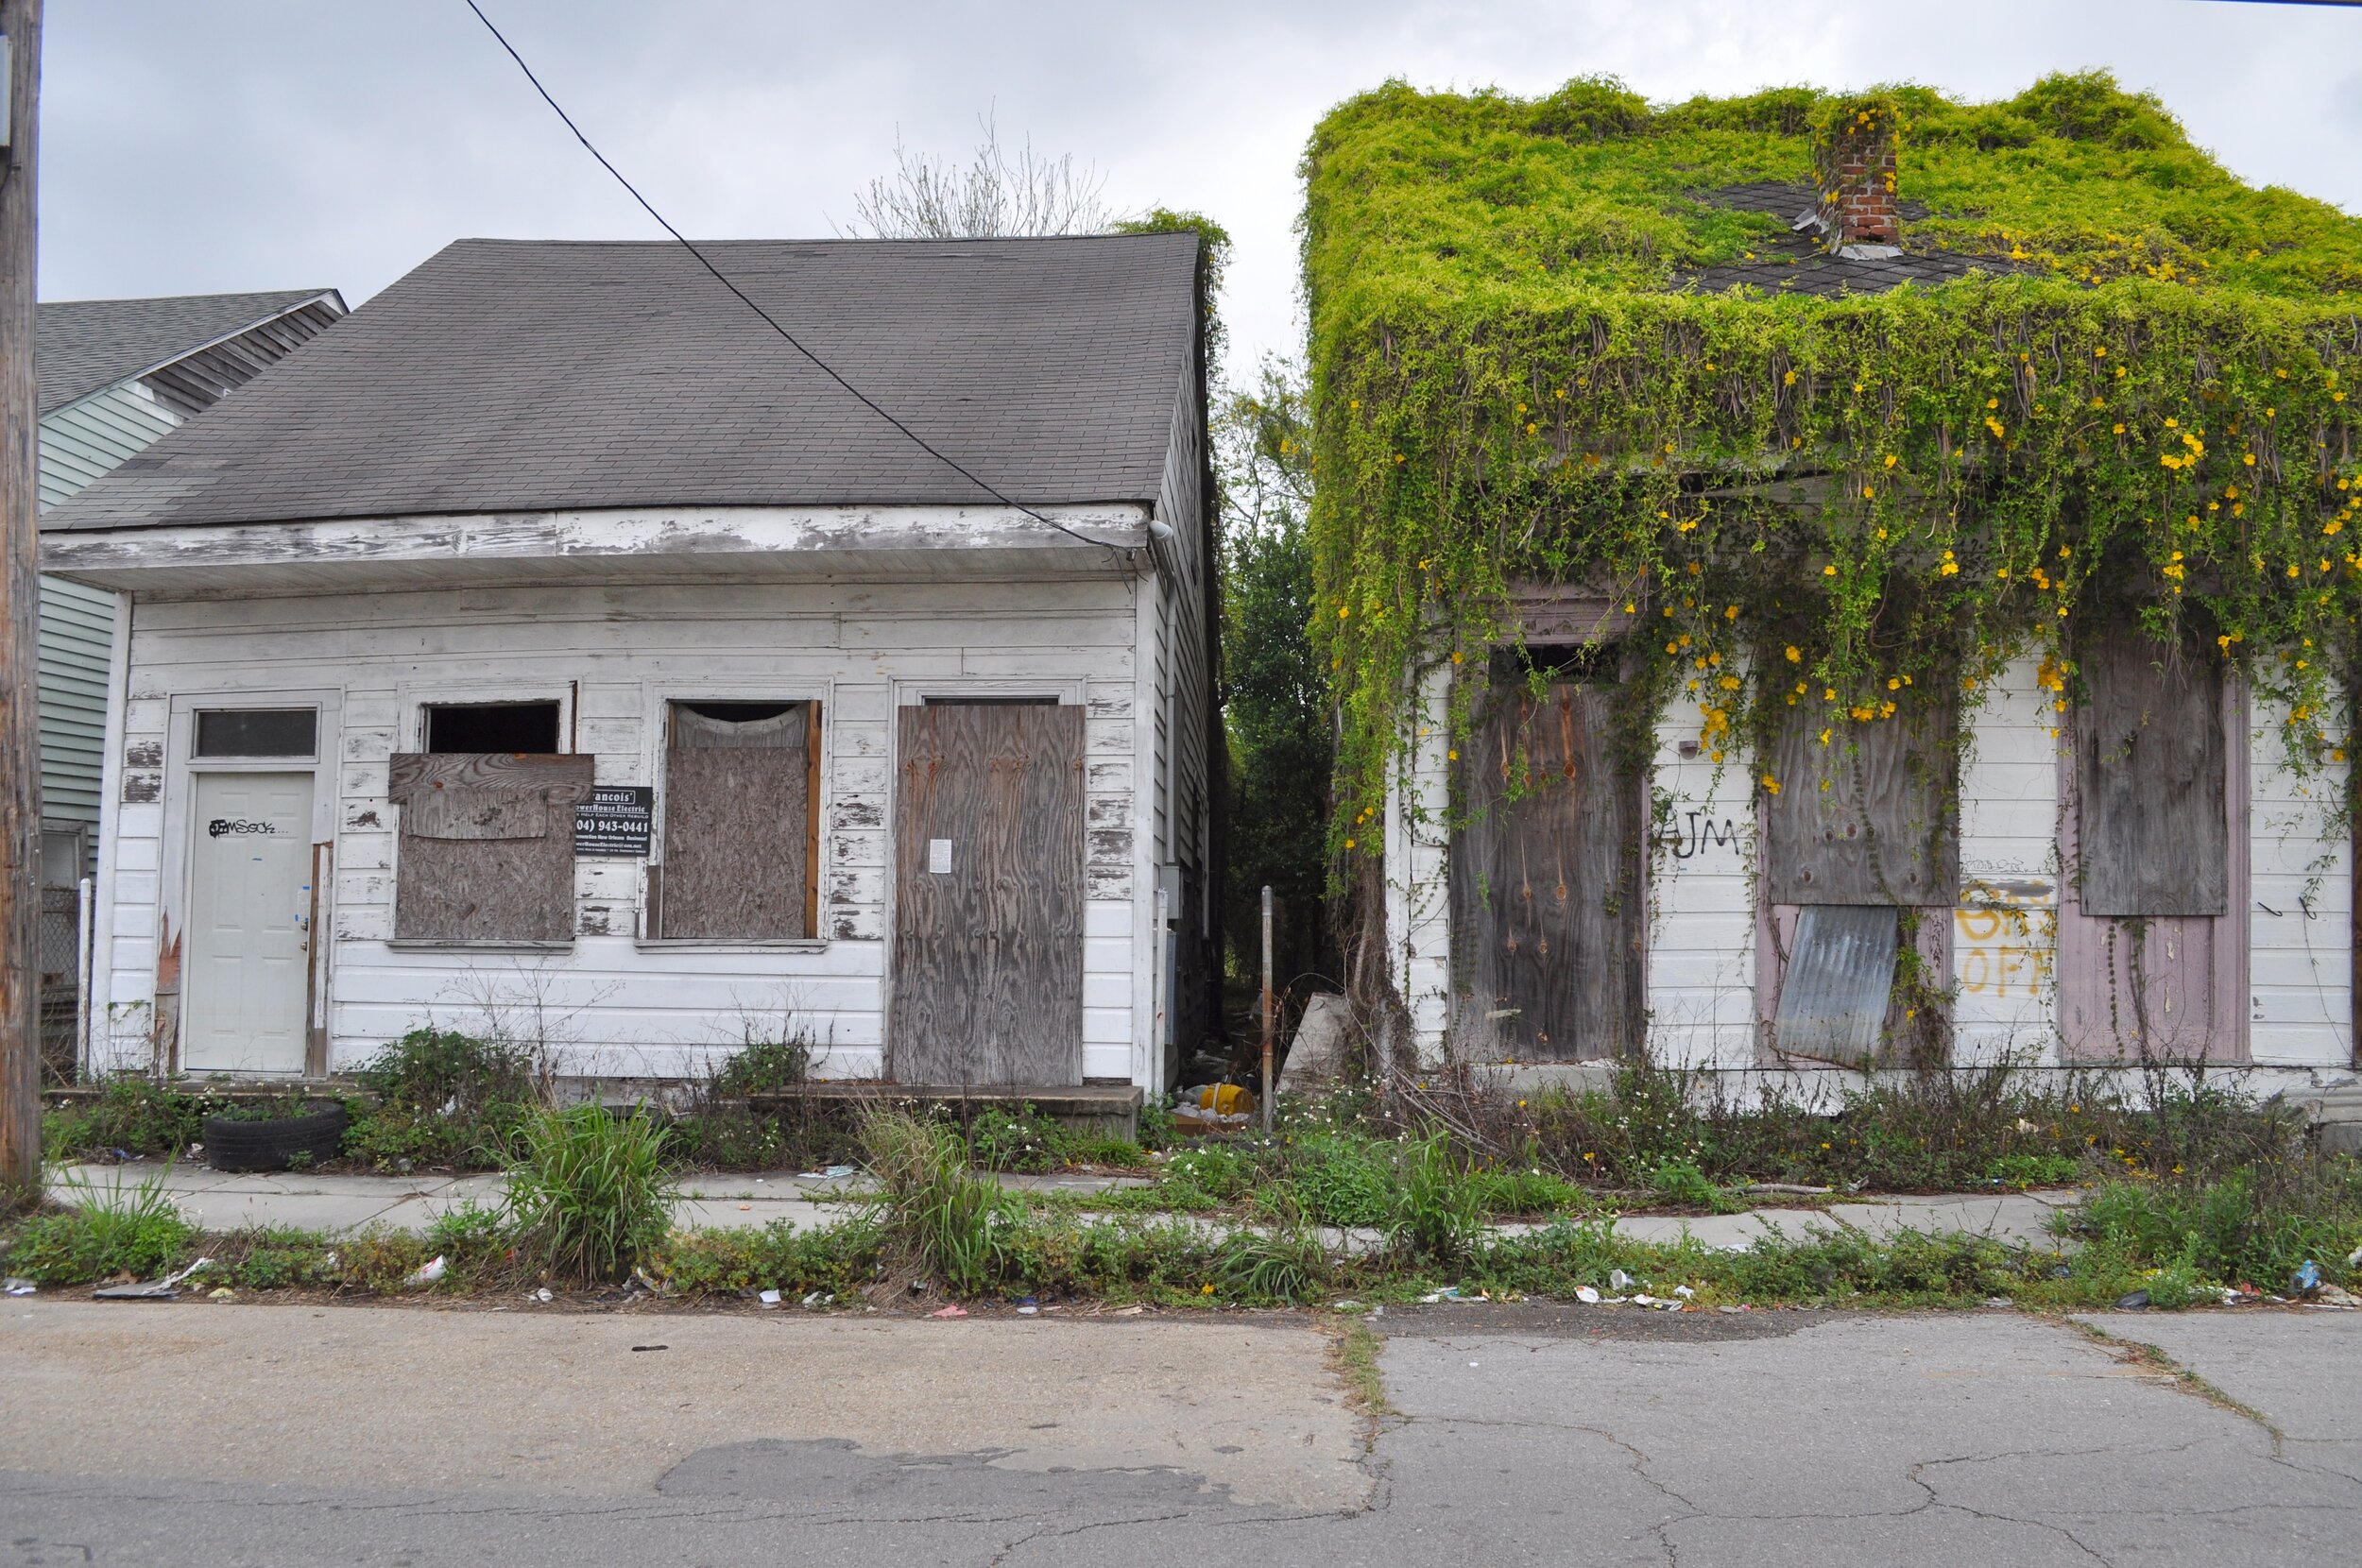 Living Roof - New Orleans, Louisiana (2015)